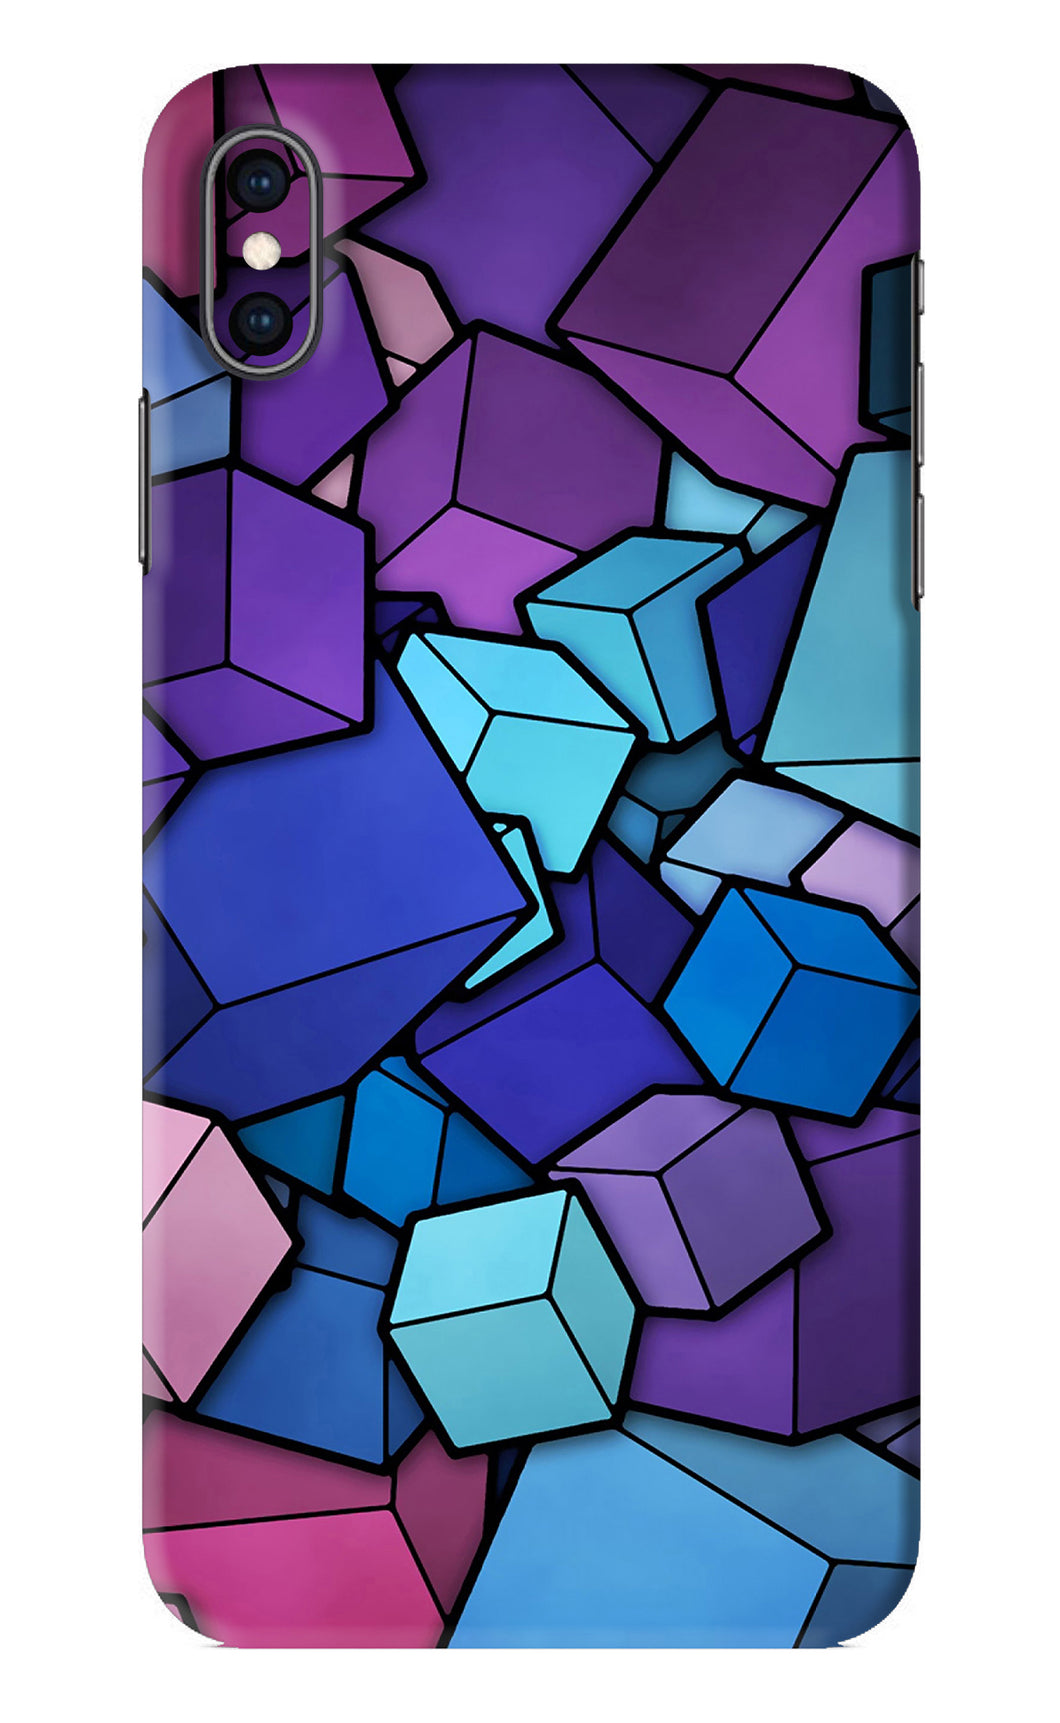 Cubic Abstract iPhone XS Max Back Skin Wrap